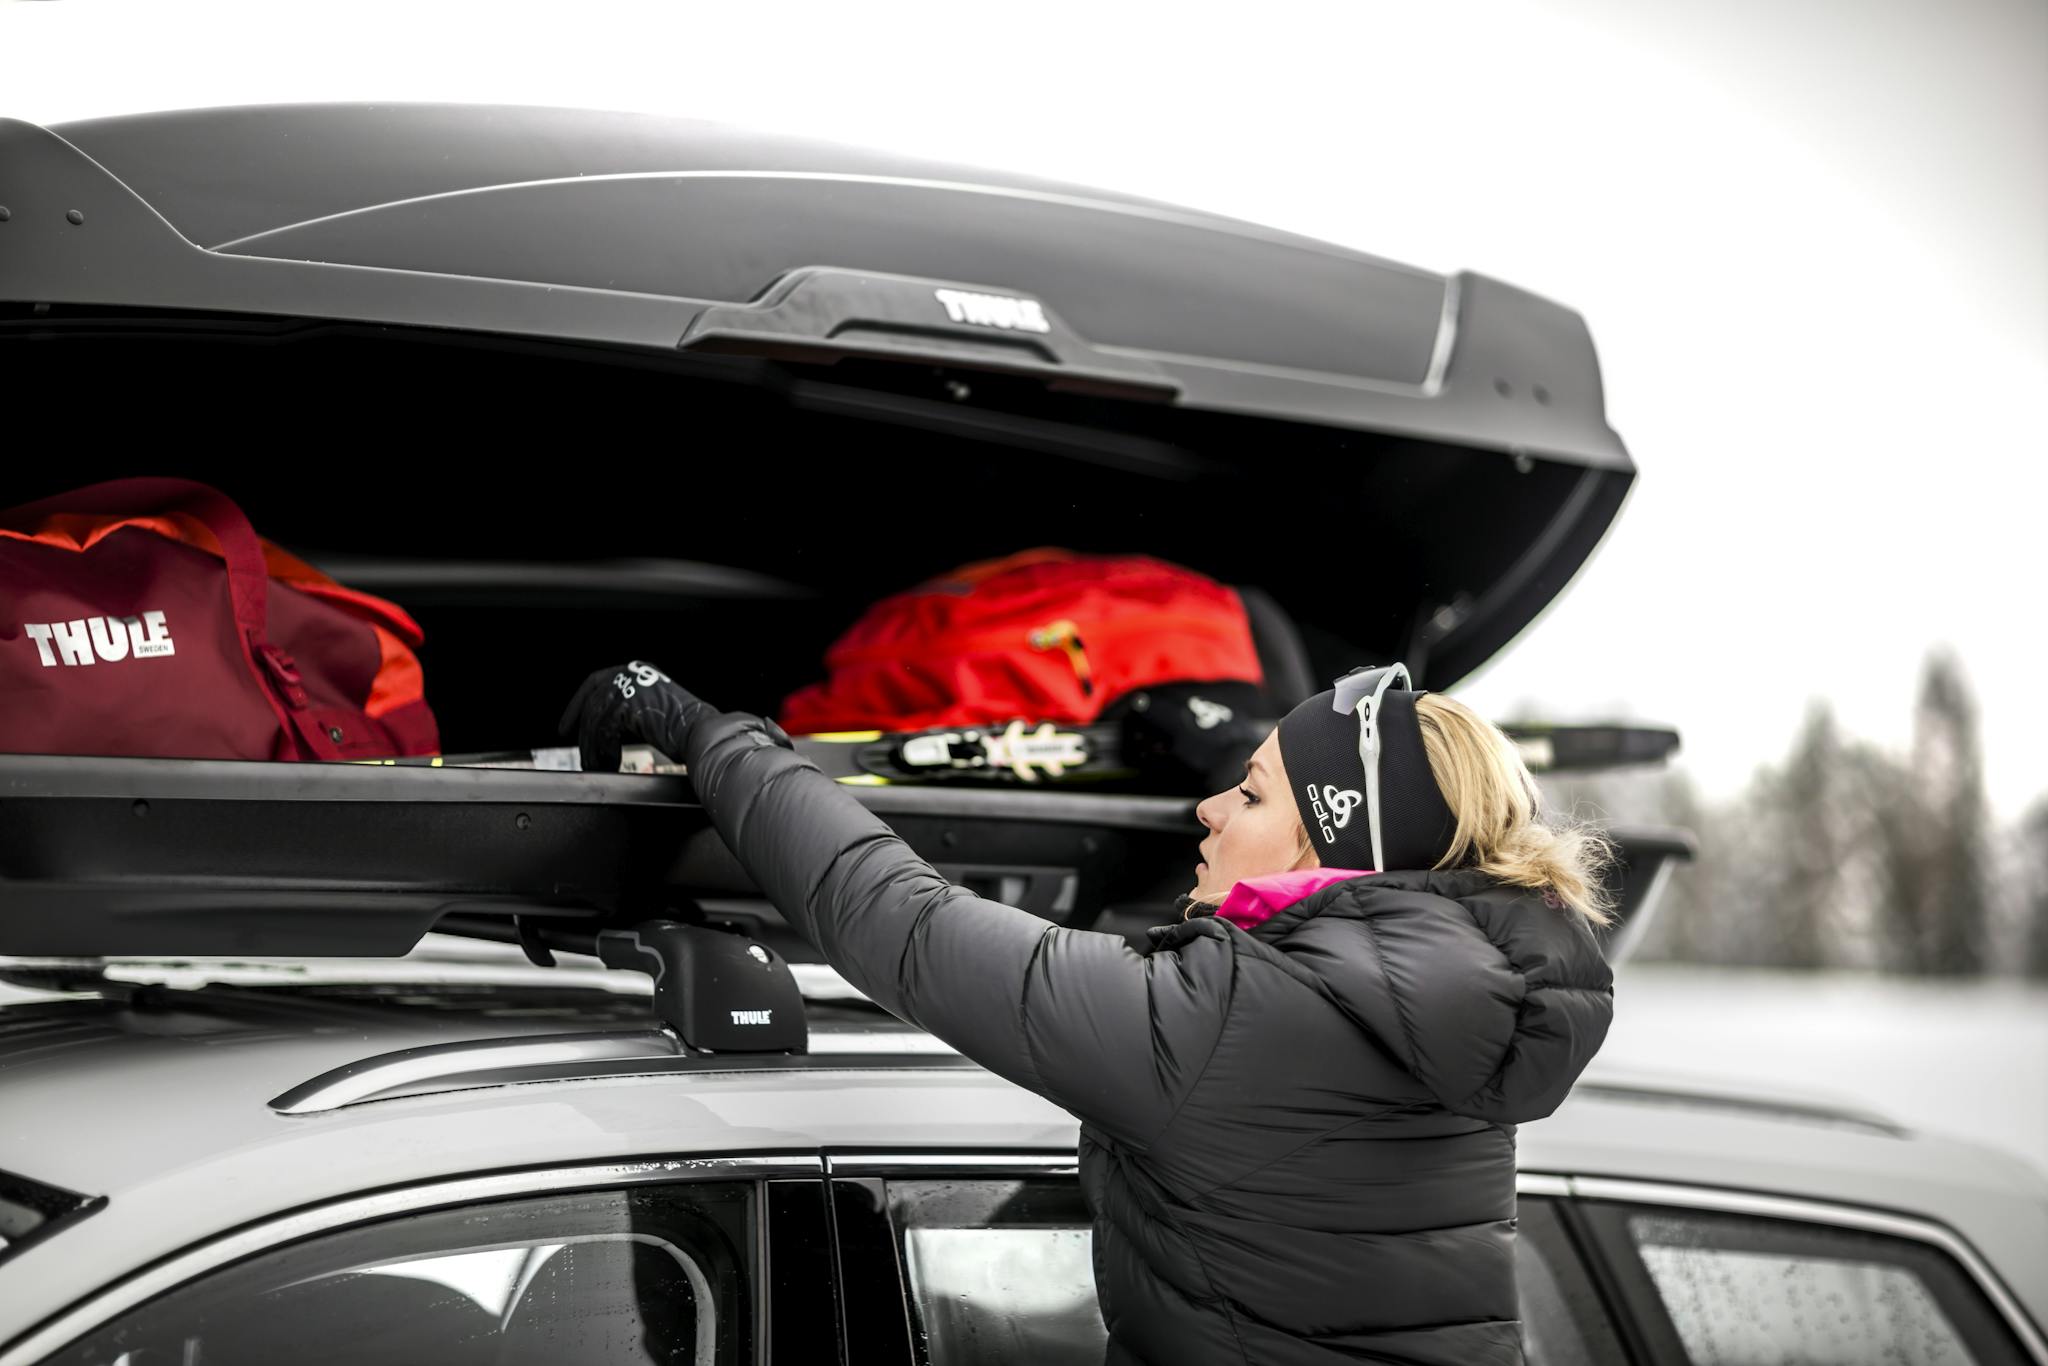 Thule Rooftop Cargo Carriers